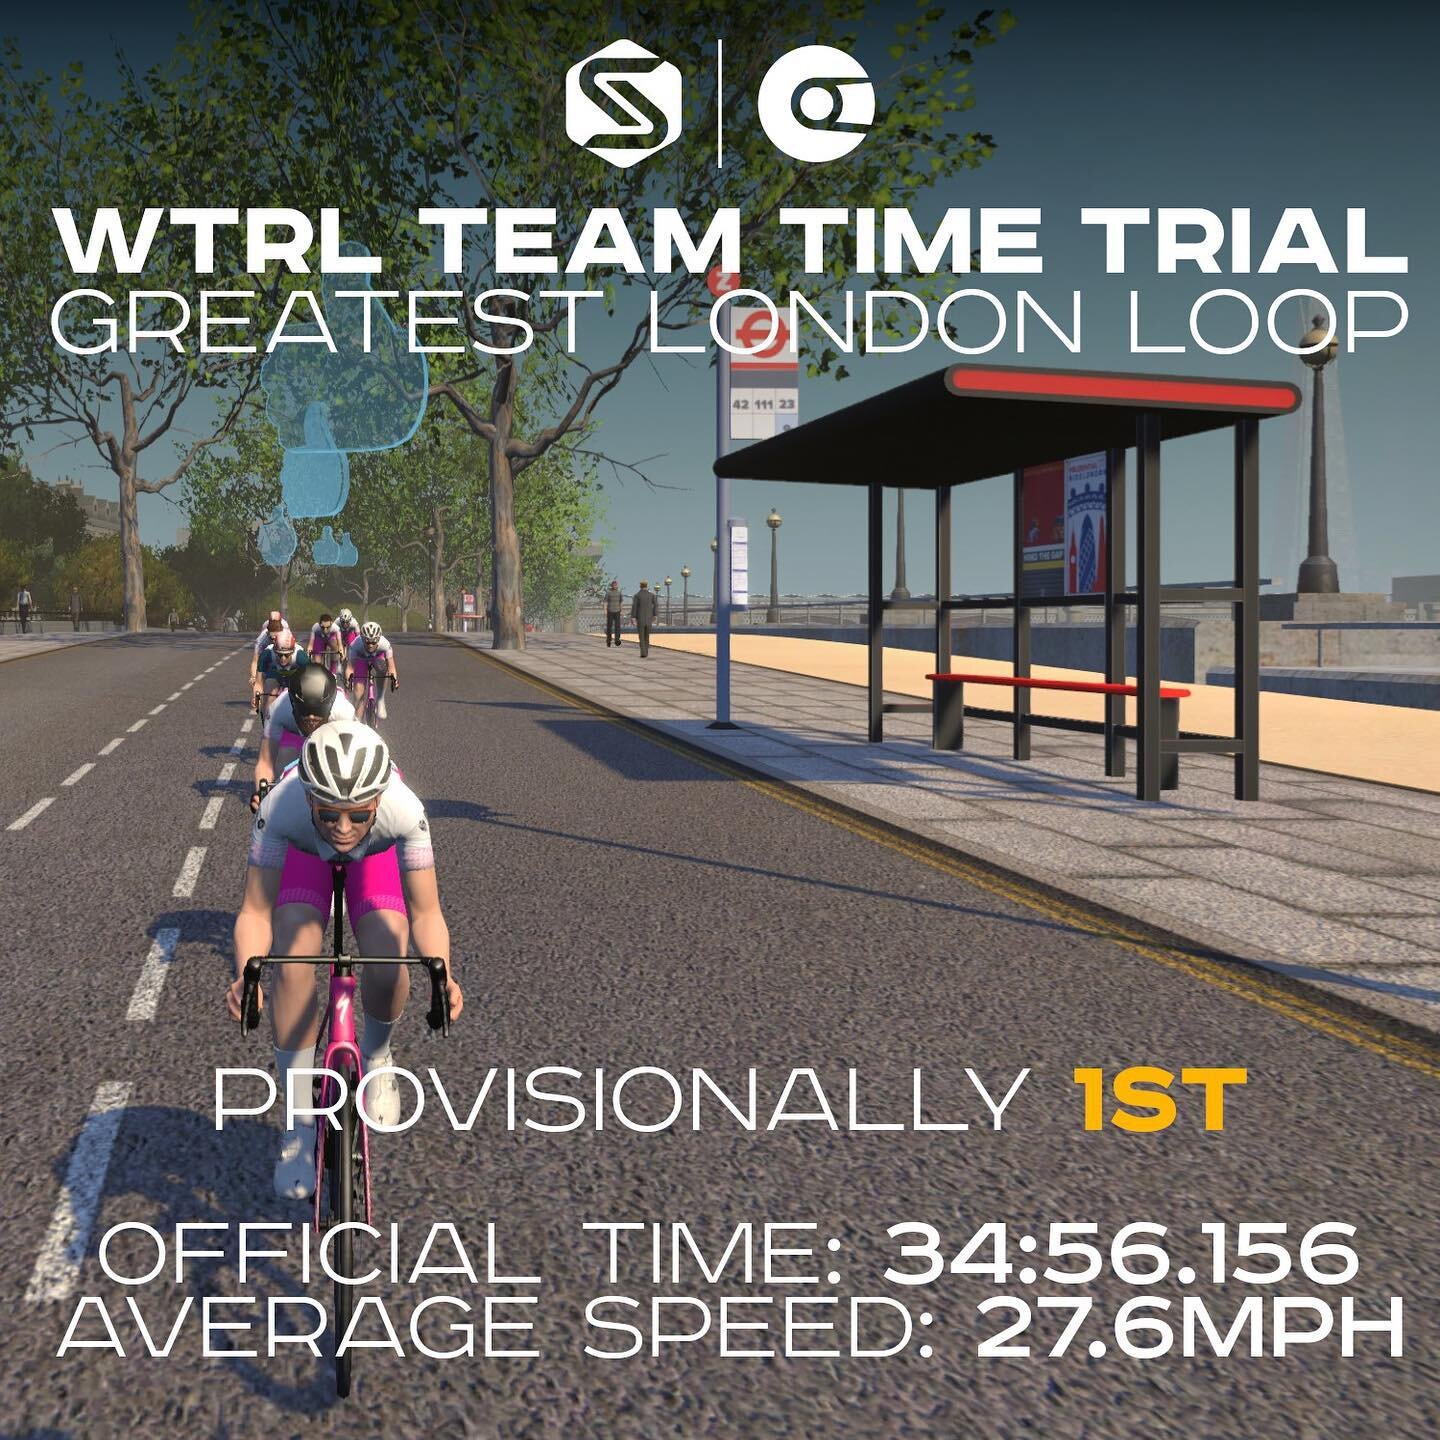 The team took on the @wtrl_racing team time trial this morning, revisiting the world championship course from 2022: Greatest London Loop!

With special guest rider @n_squillari from @aero_racing_team joining for some type-2 fun, the crew put down the